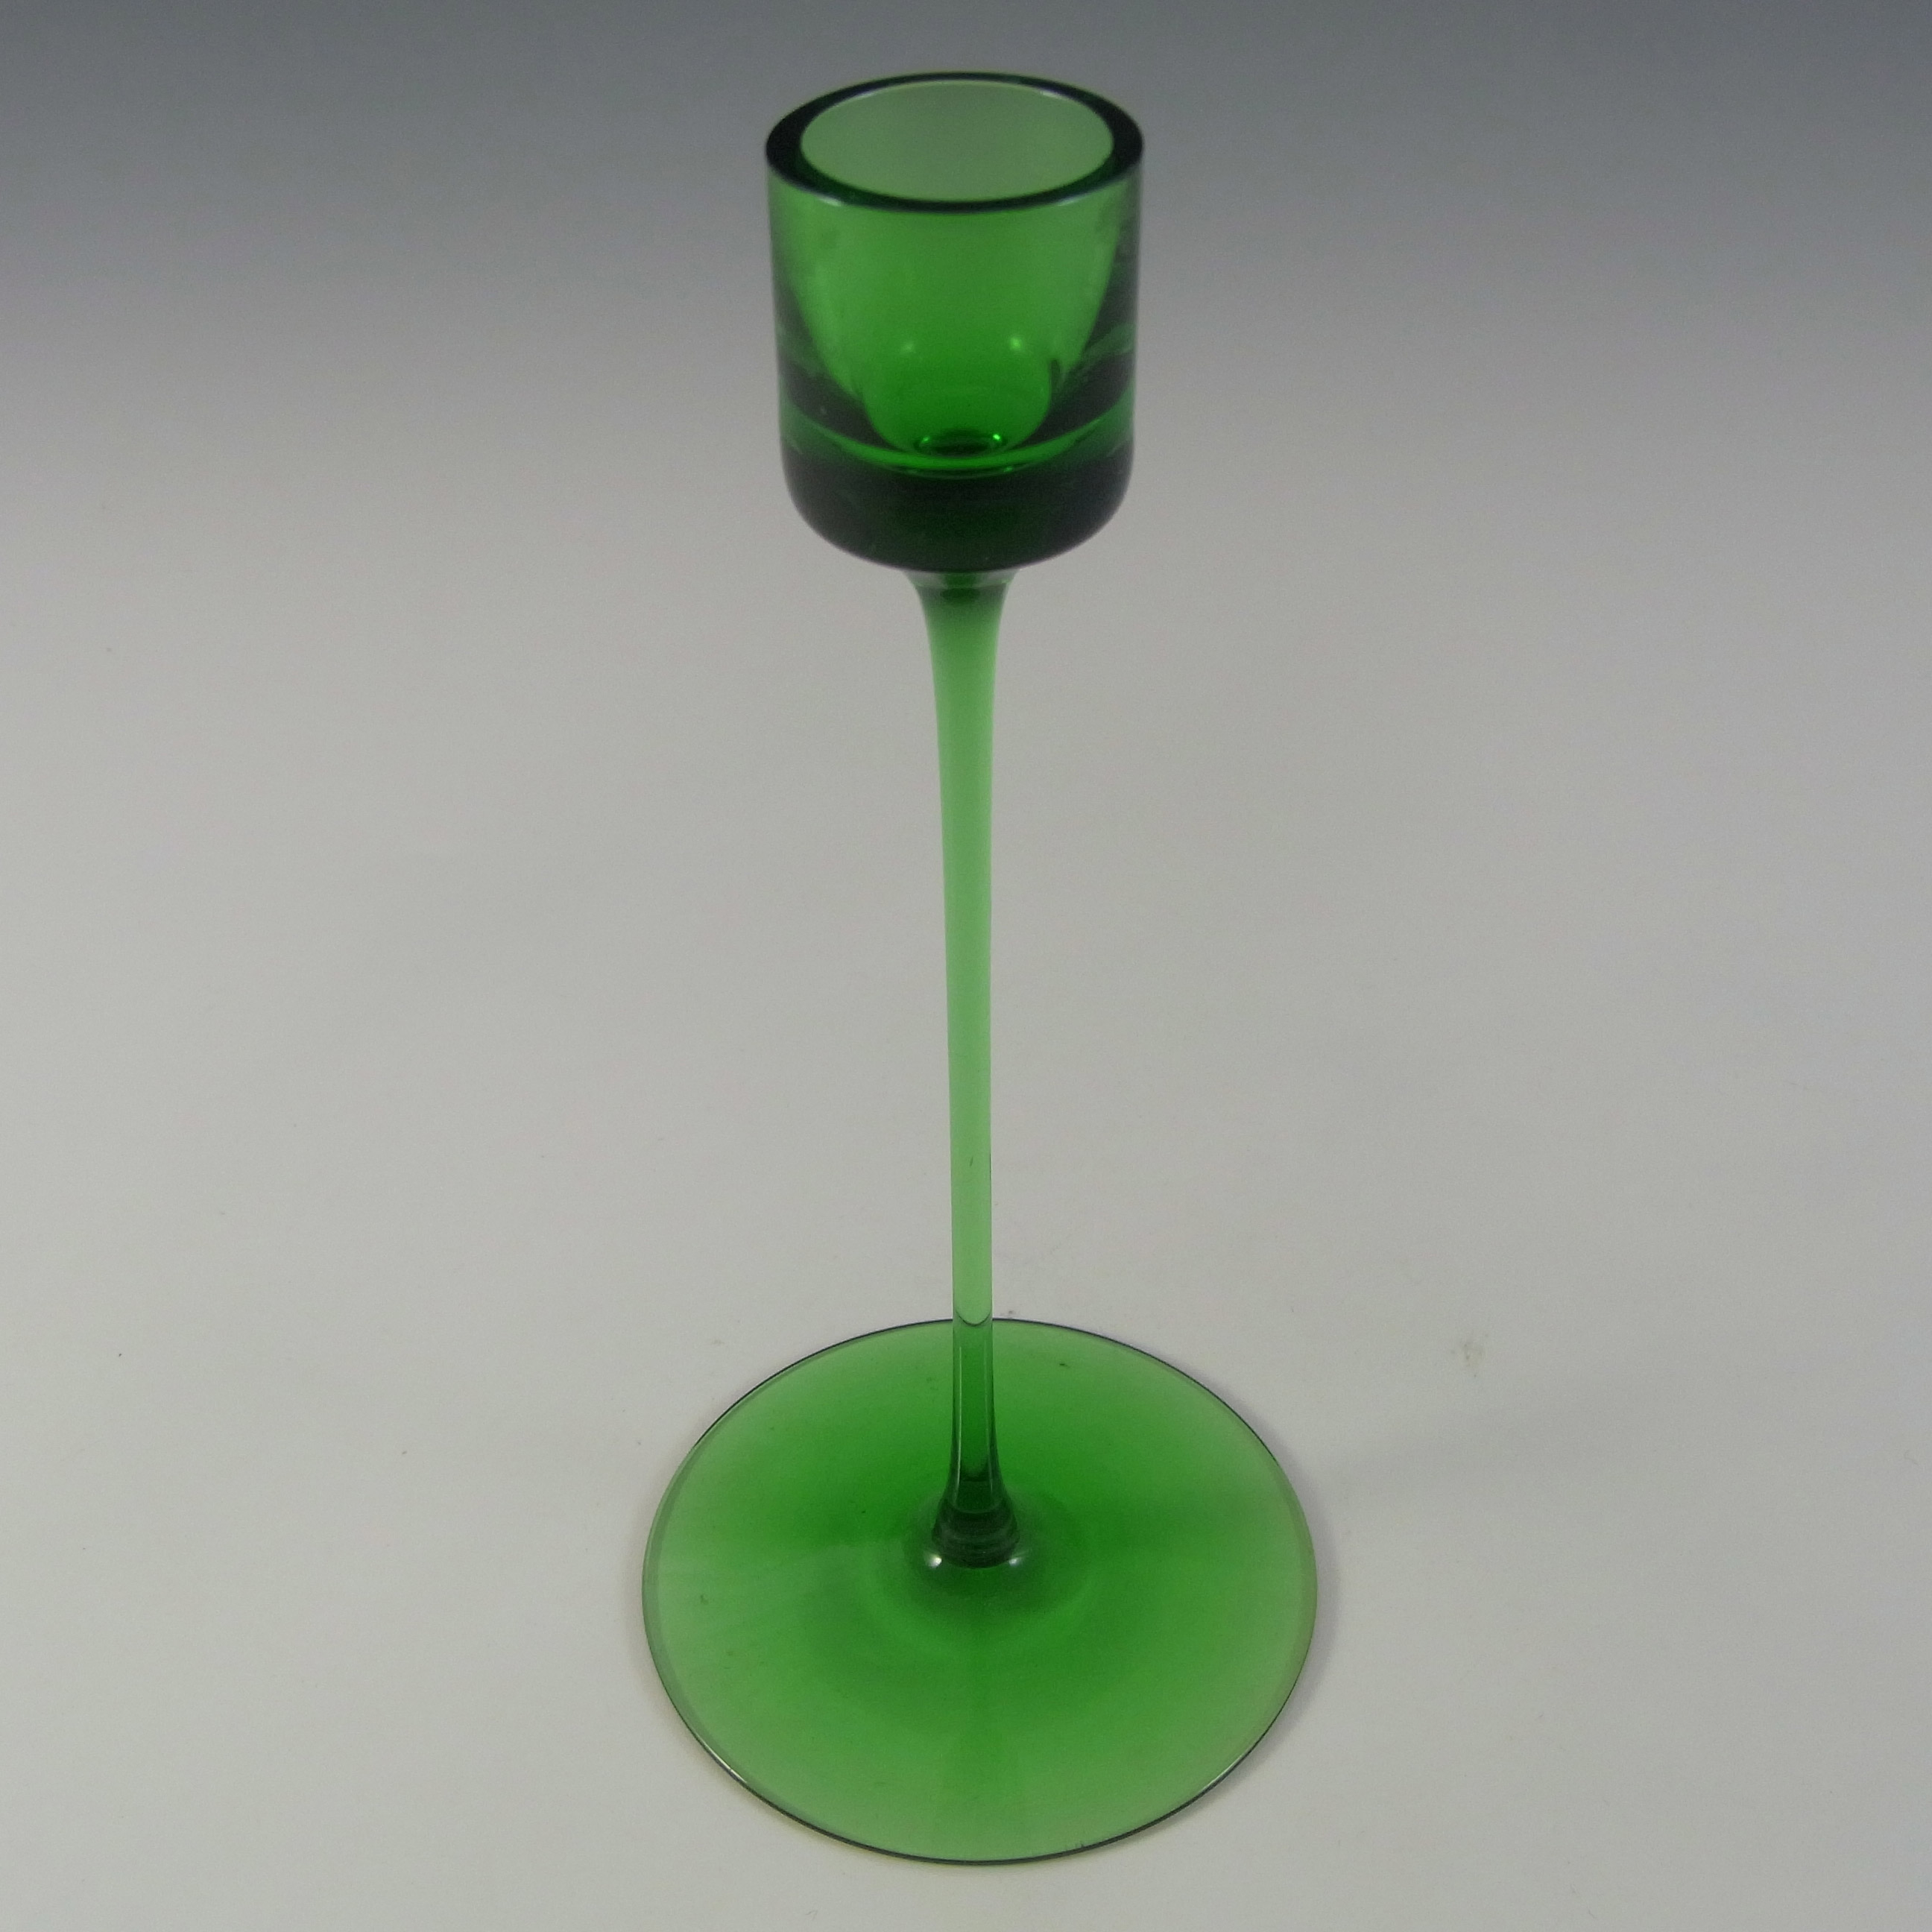 Wedgwood "Sandringham" Green Glass 6.5" Candlestick RSW22/2 - Click Image to Close